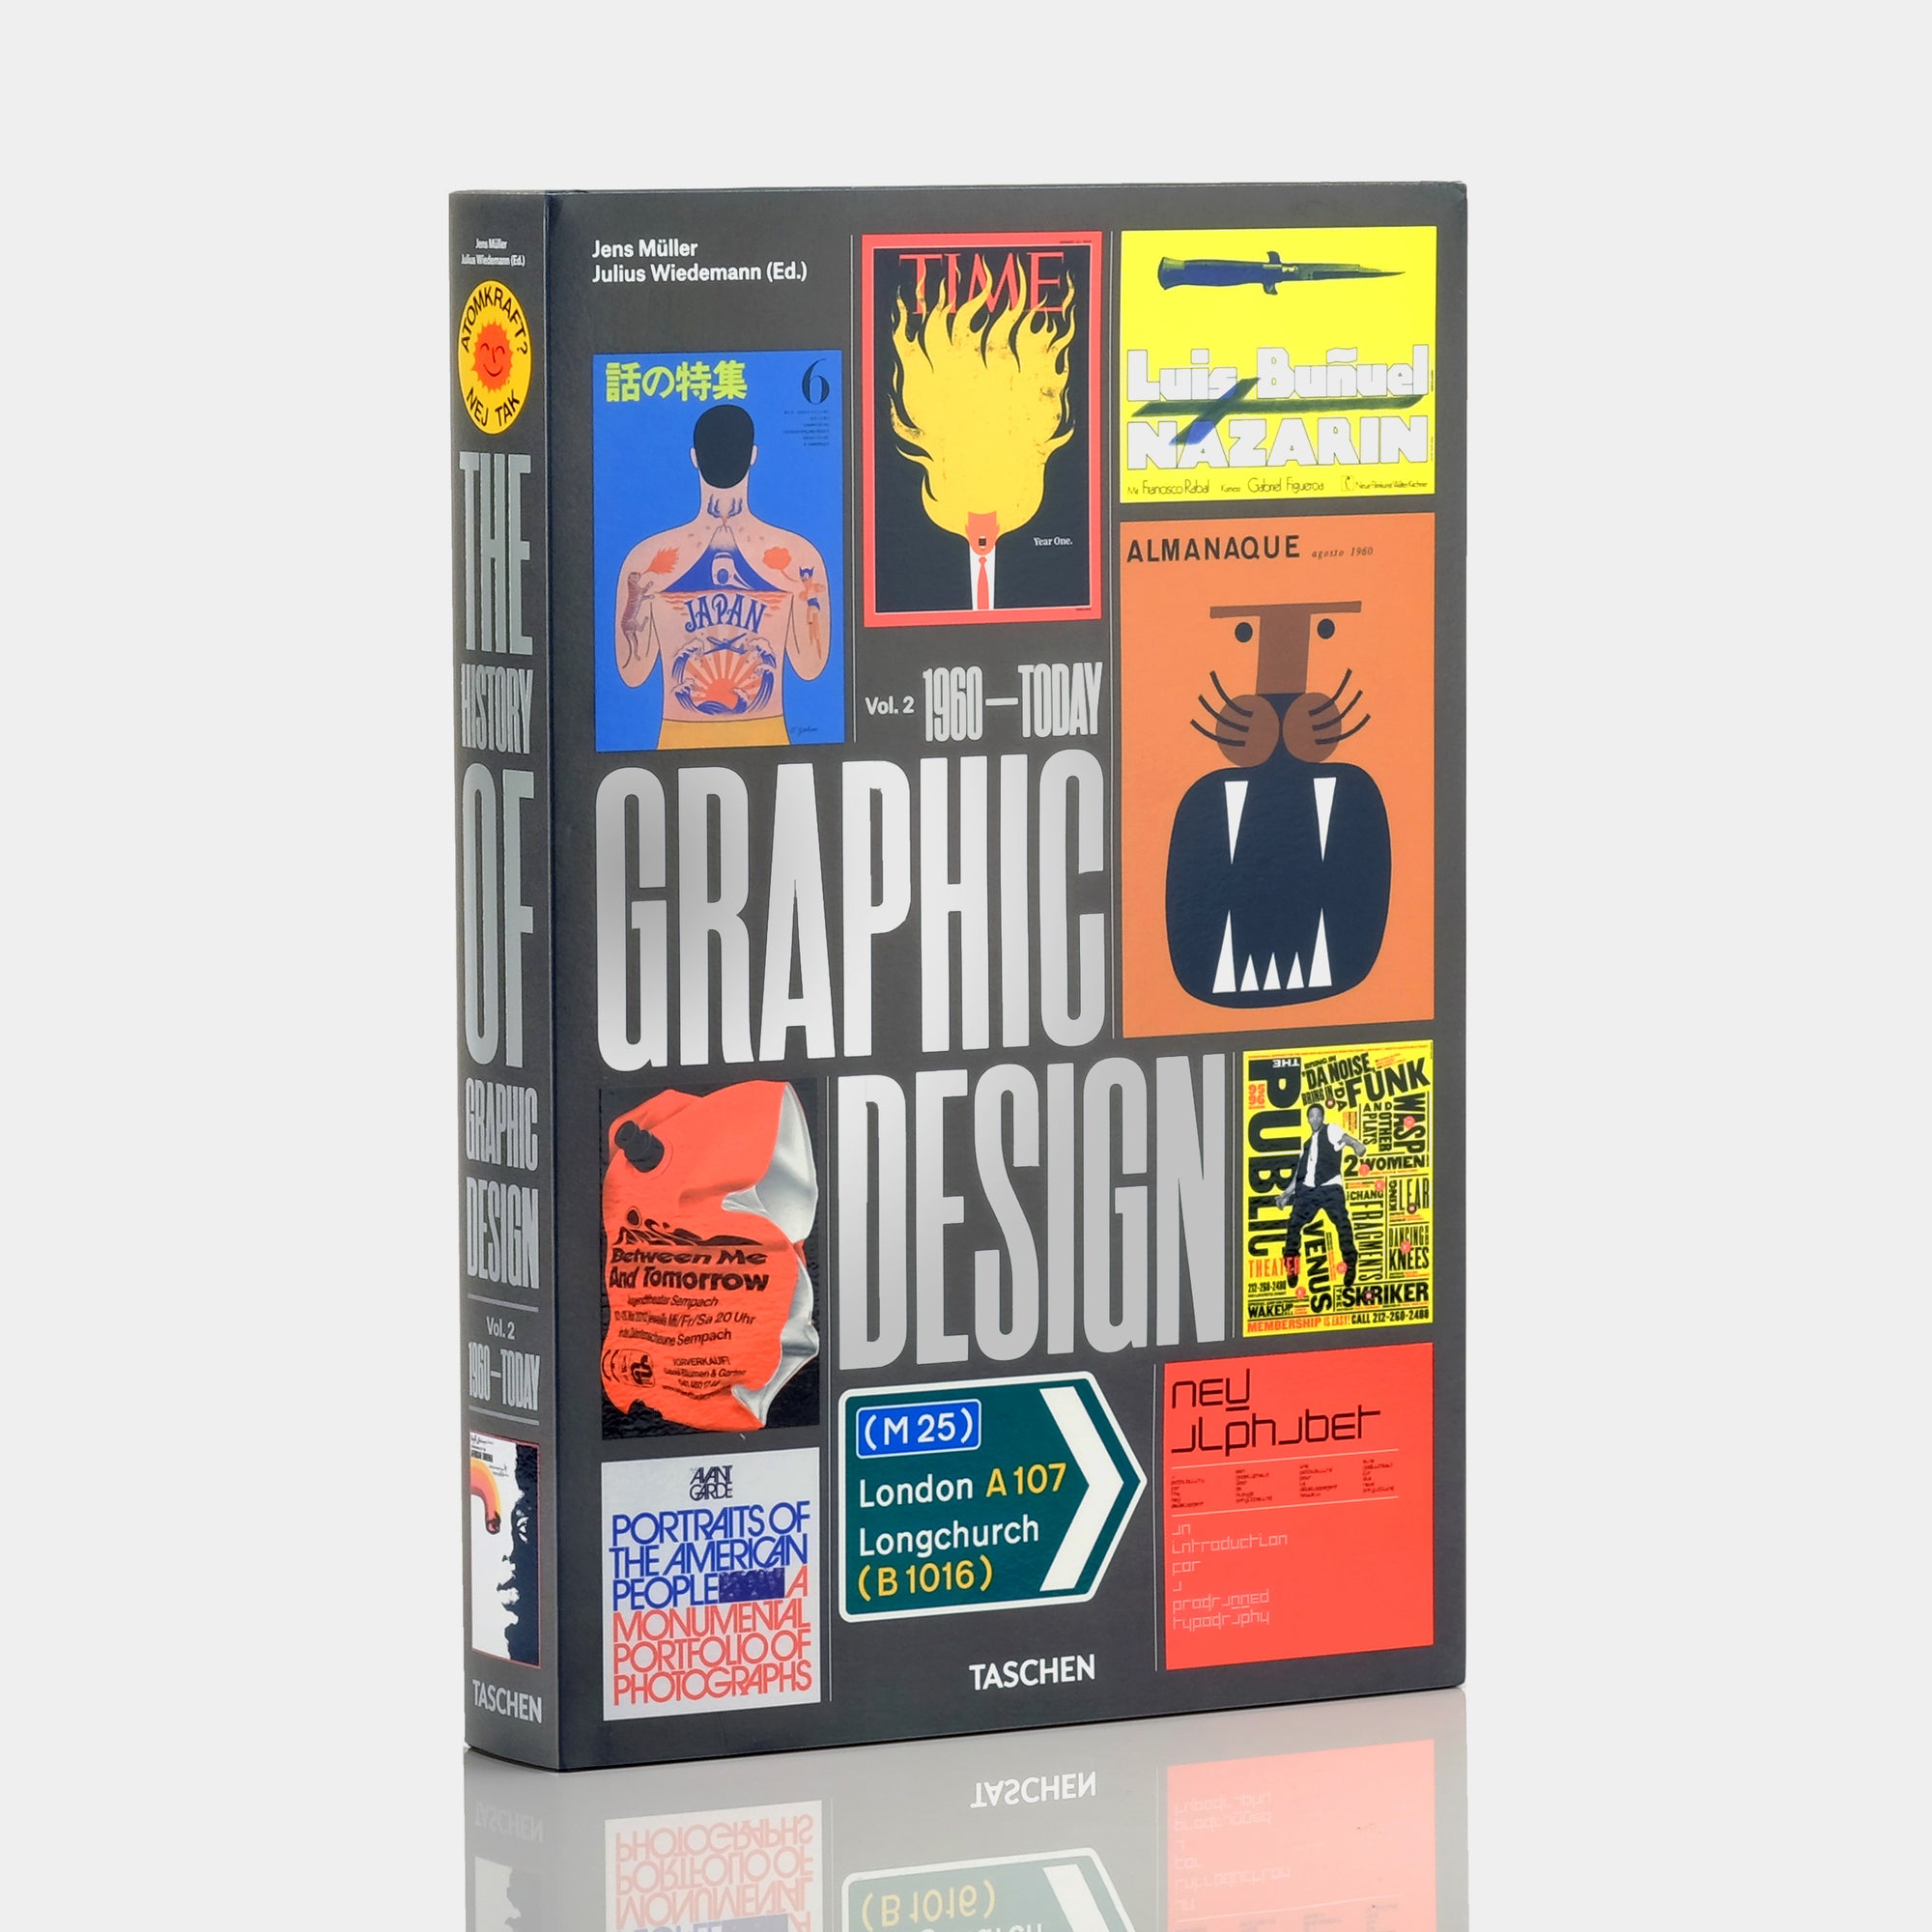 The History of Graphic Design: Vol. 2. (1960-Today) by Jens Müller XL